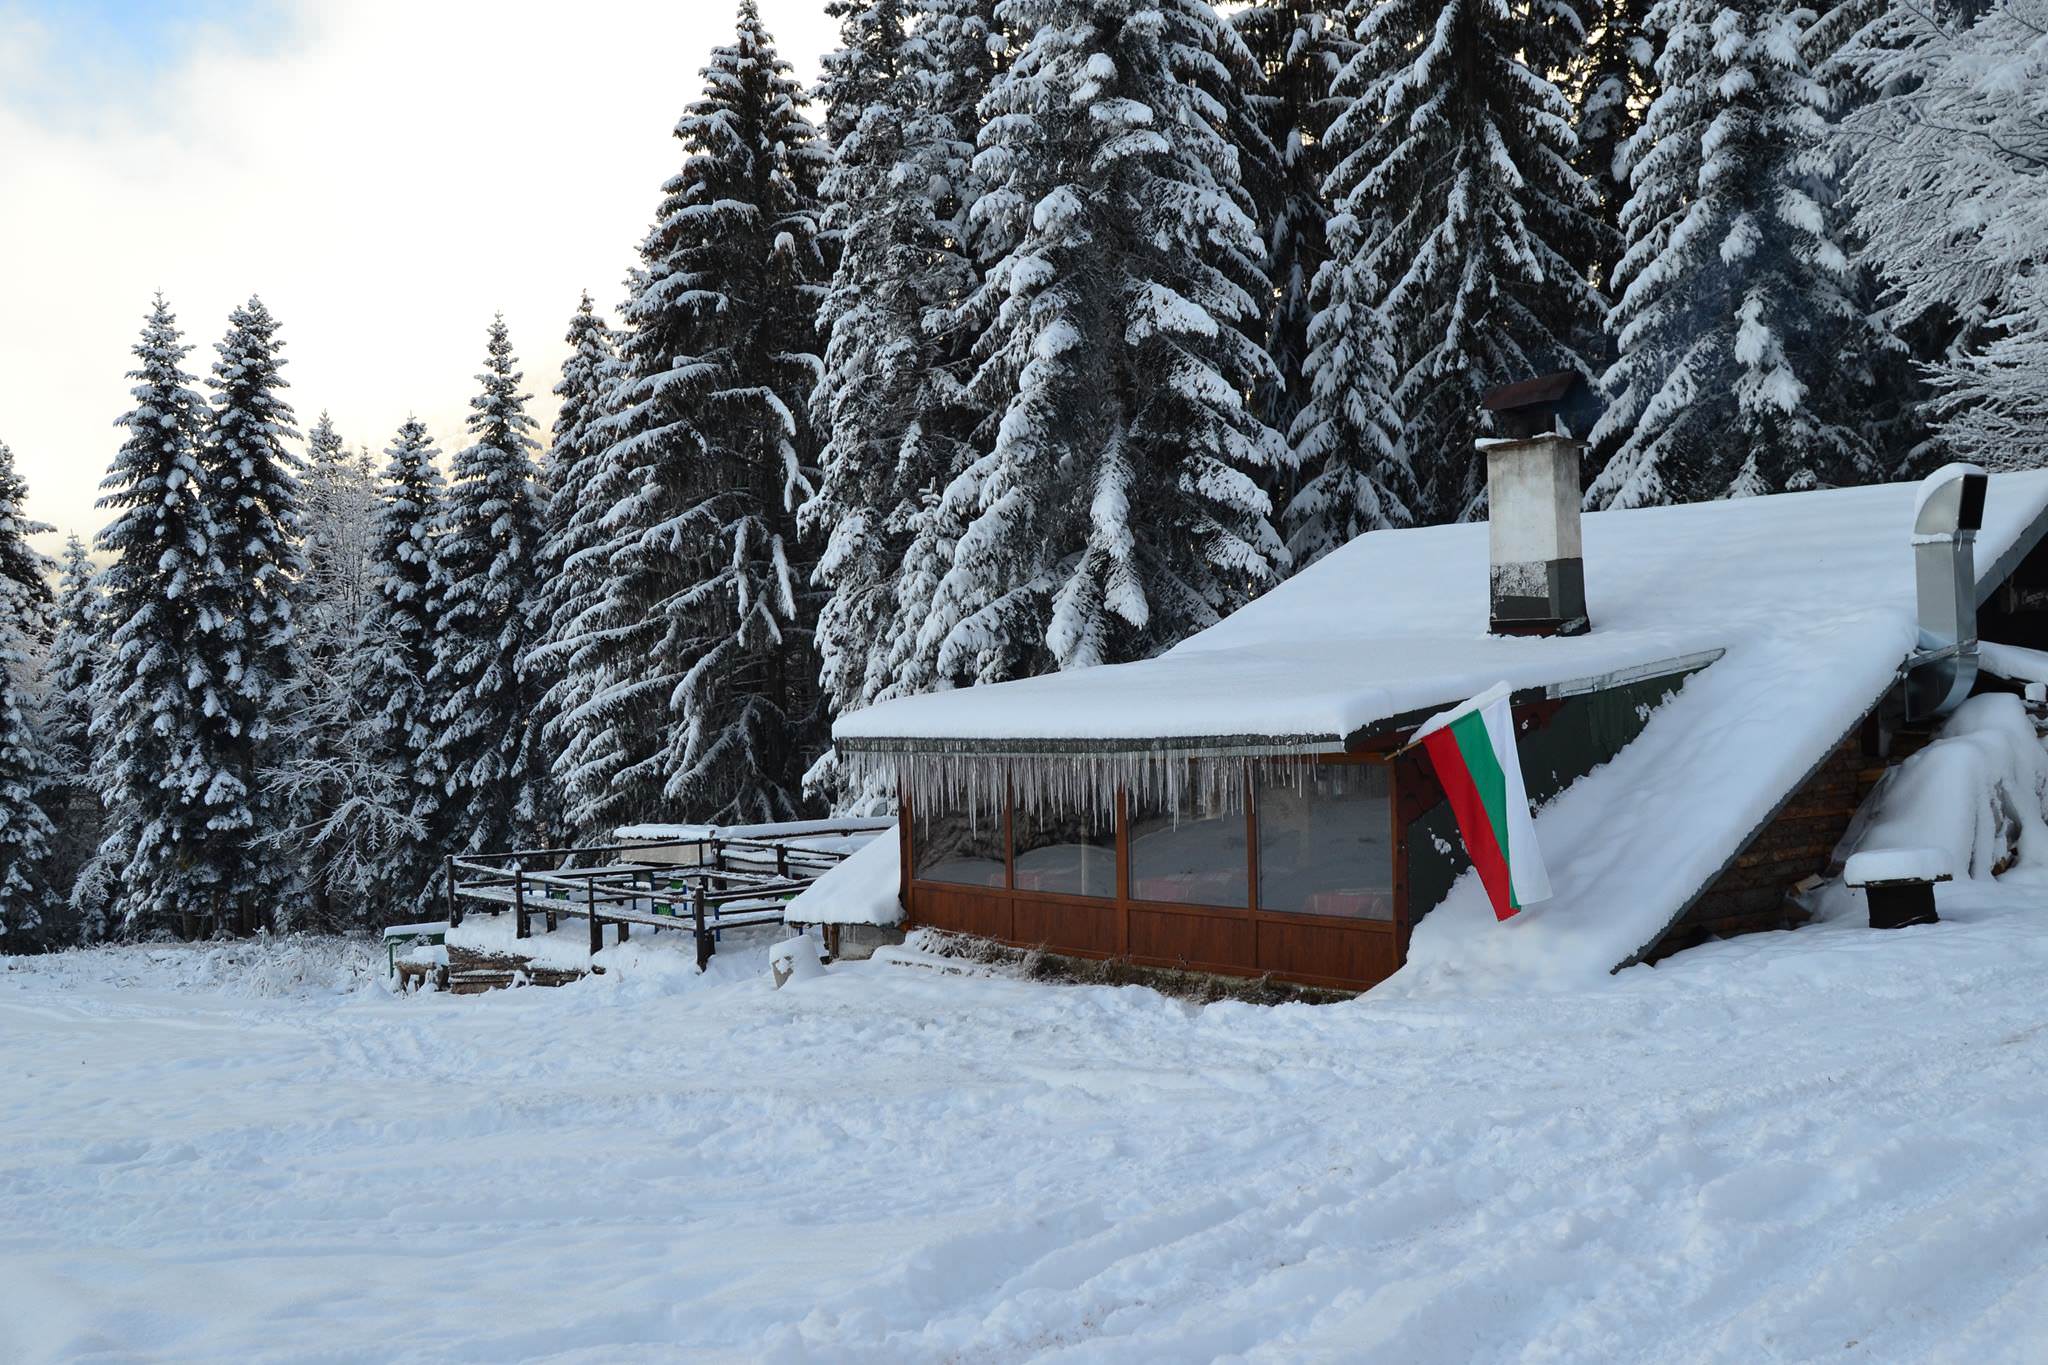 Photo of the teahouse outside. Small wooden house with smoking chimney nestled in the snow. To the left is a trellis with benches and tables. On the right side of the house is the Bulgarian flag.